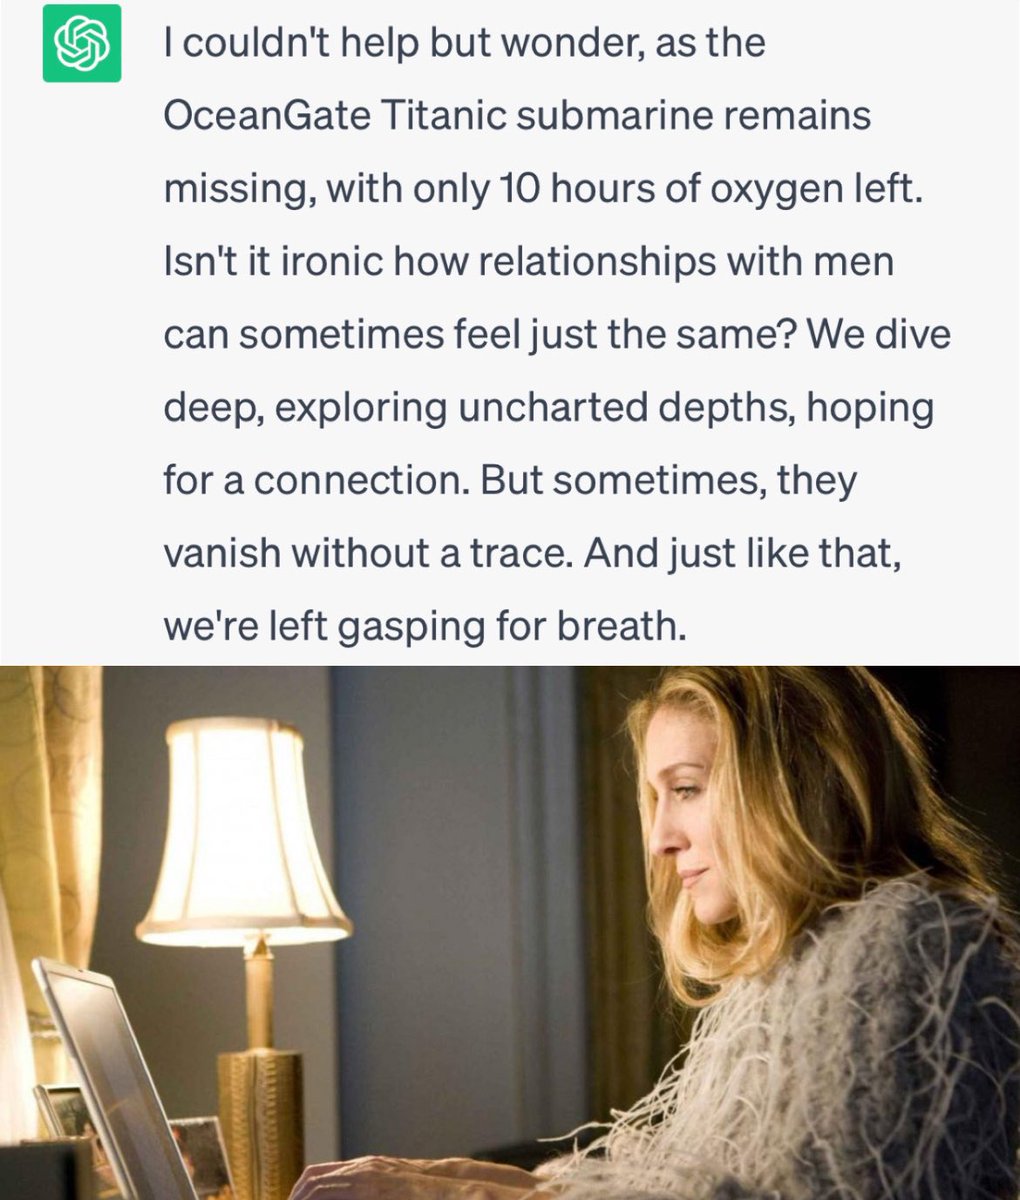 I asked Chat GPT to write about #OceanGate Titanic submarine in the voice of Carrie Bradshaw 😭